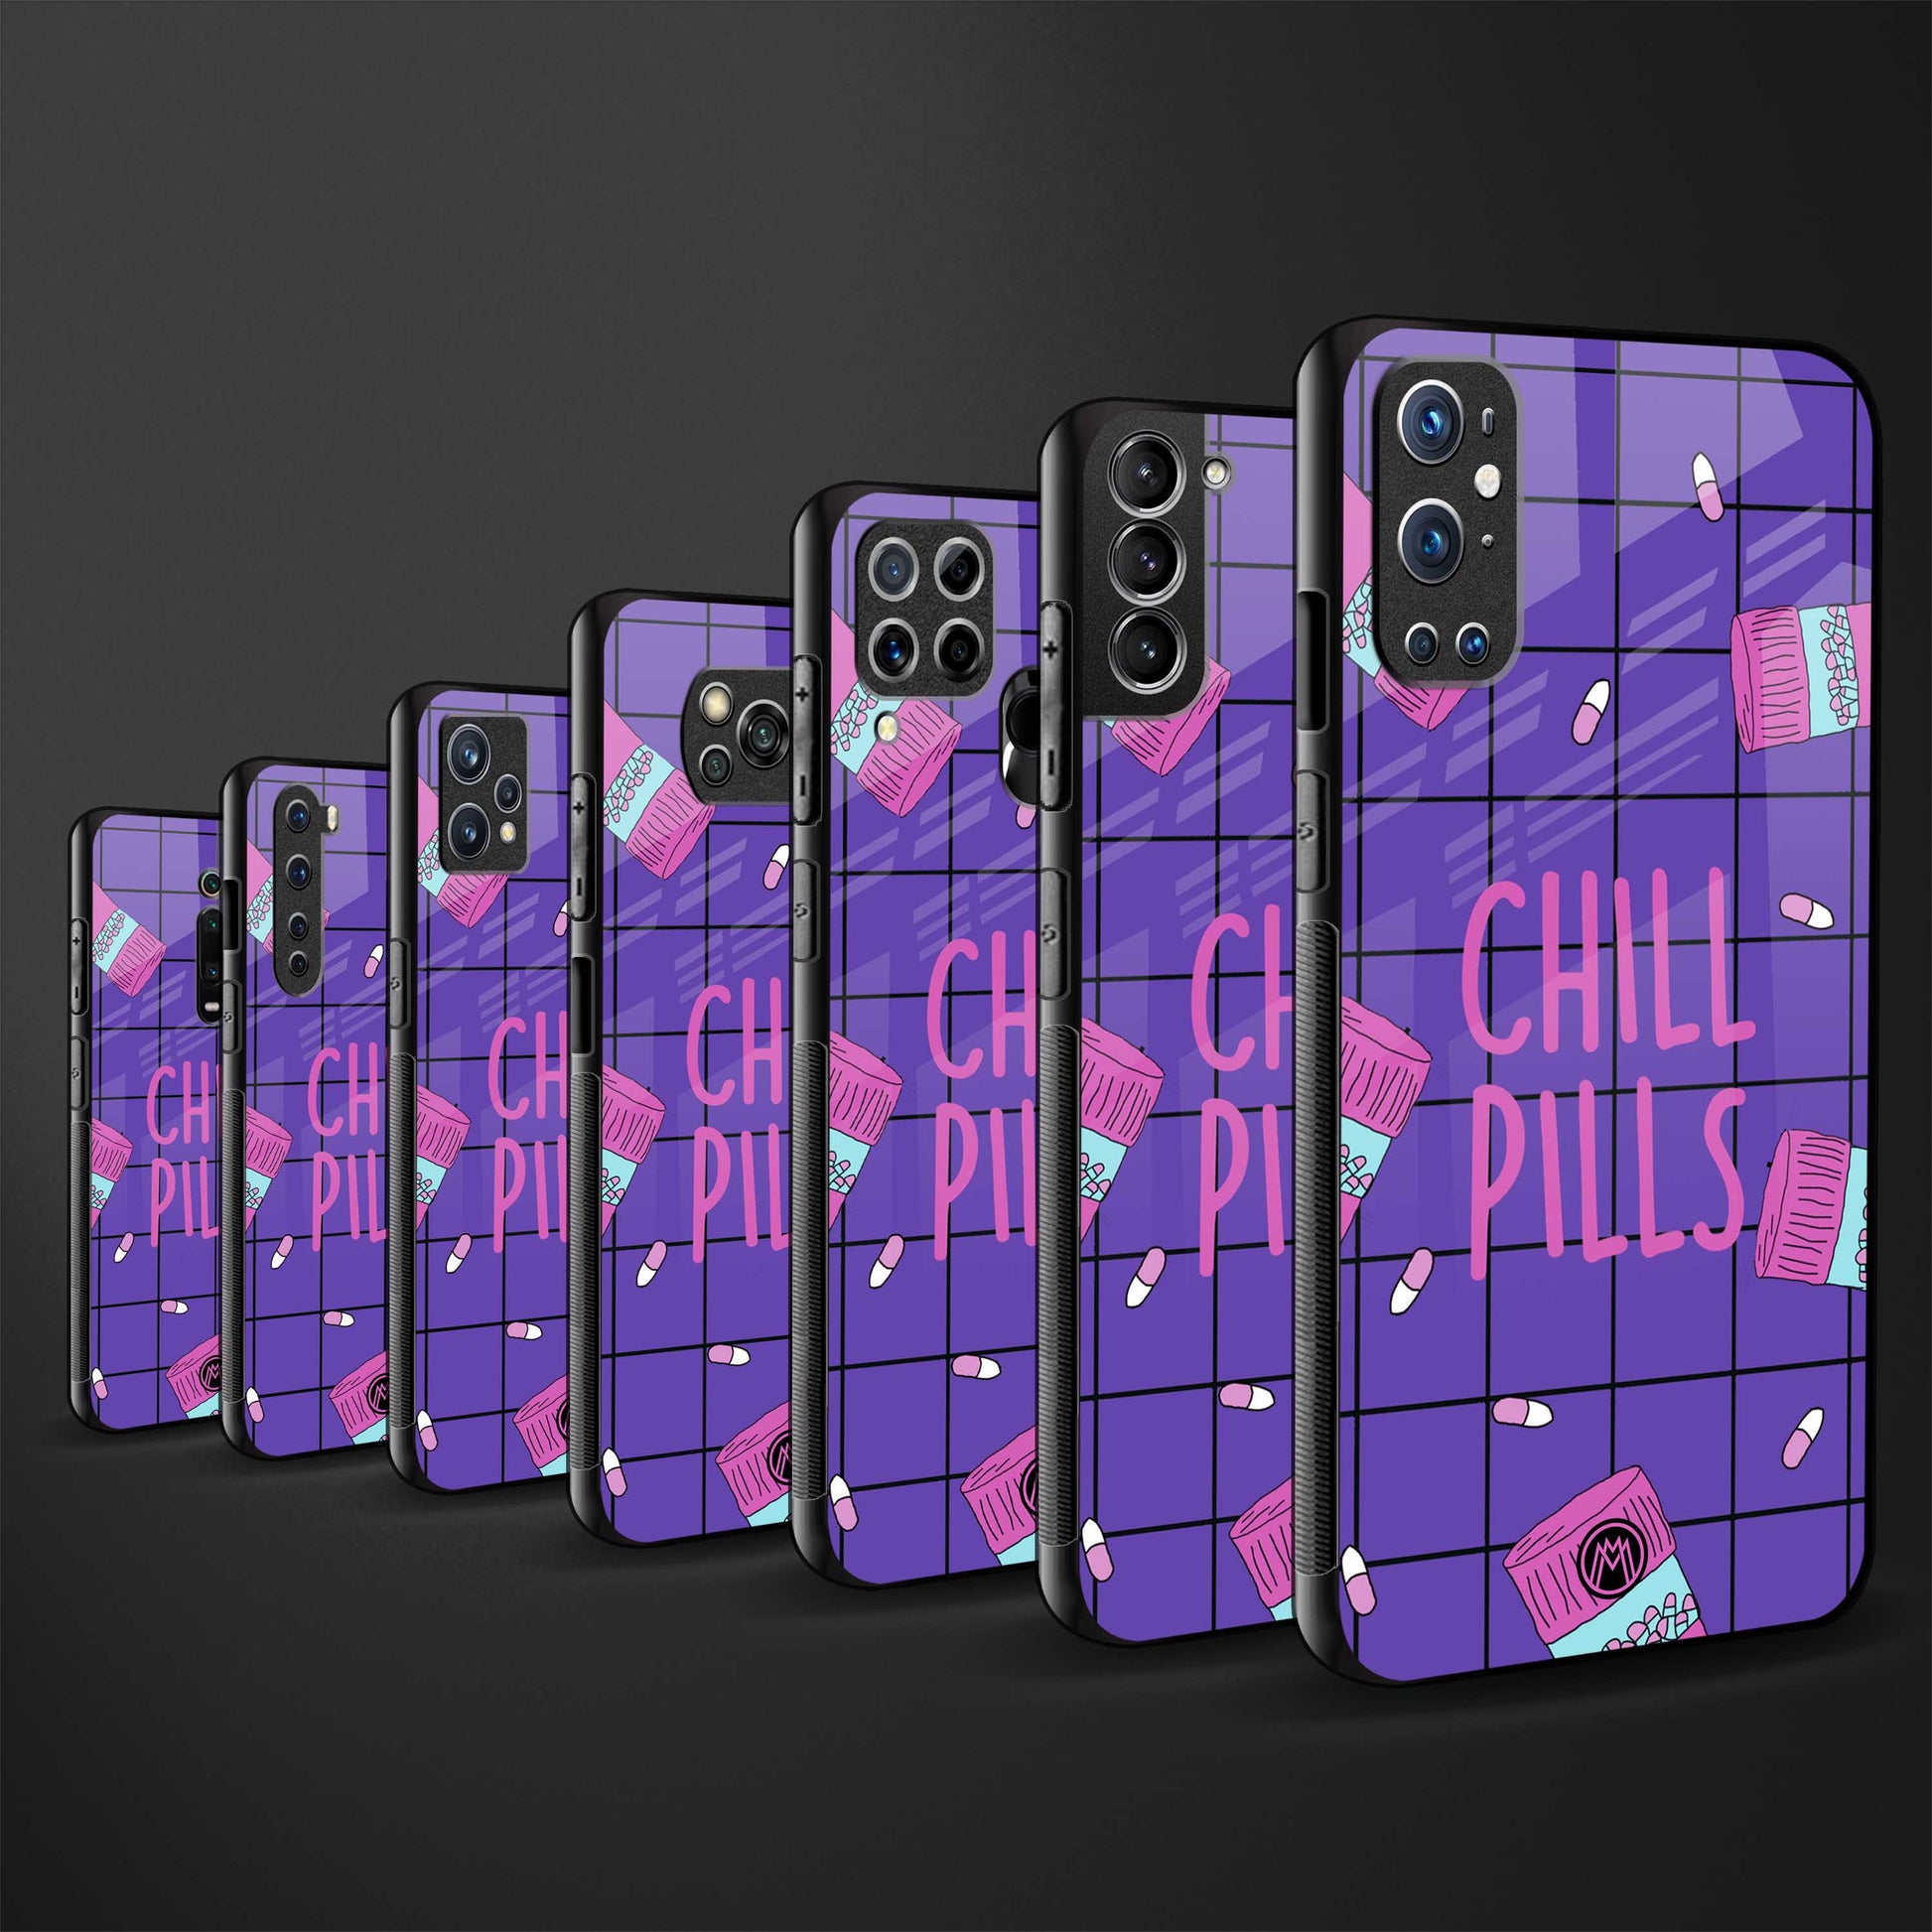 chill pills back phone cover | glass case for samsun galaxy a24 4g